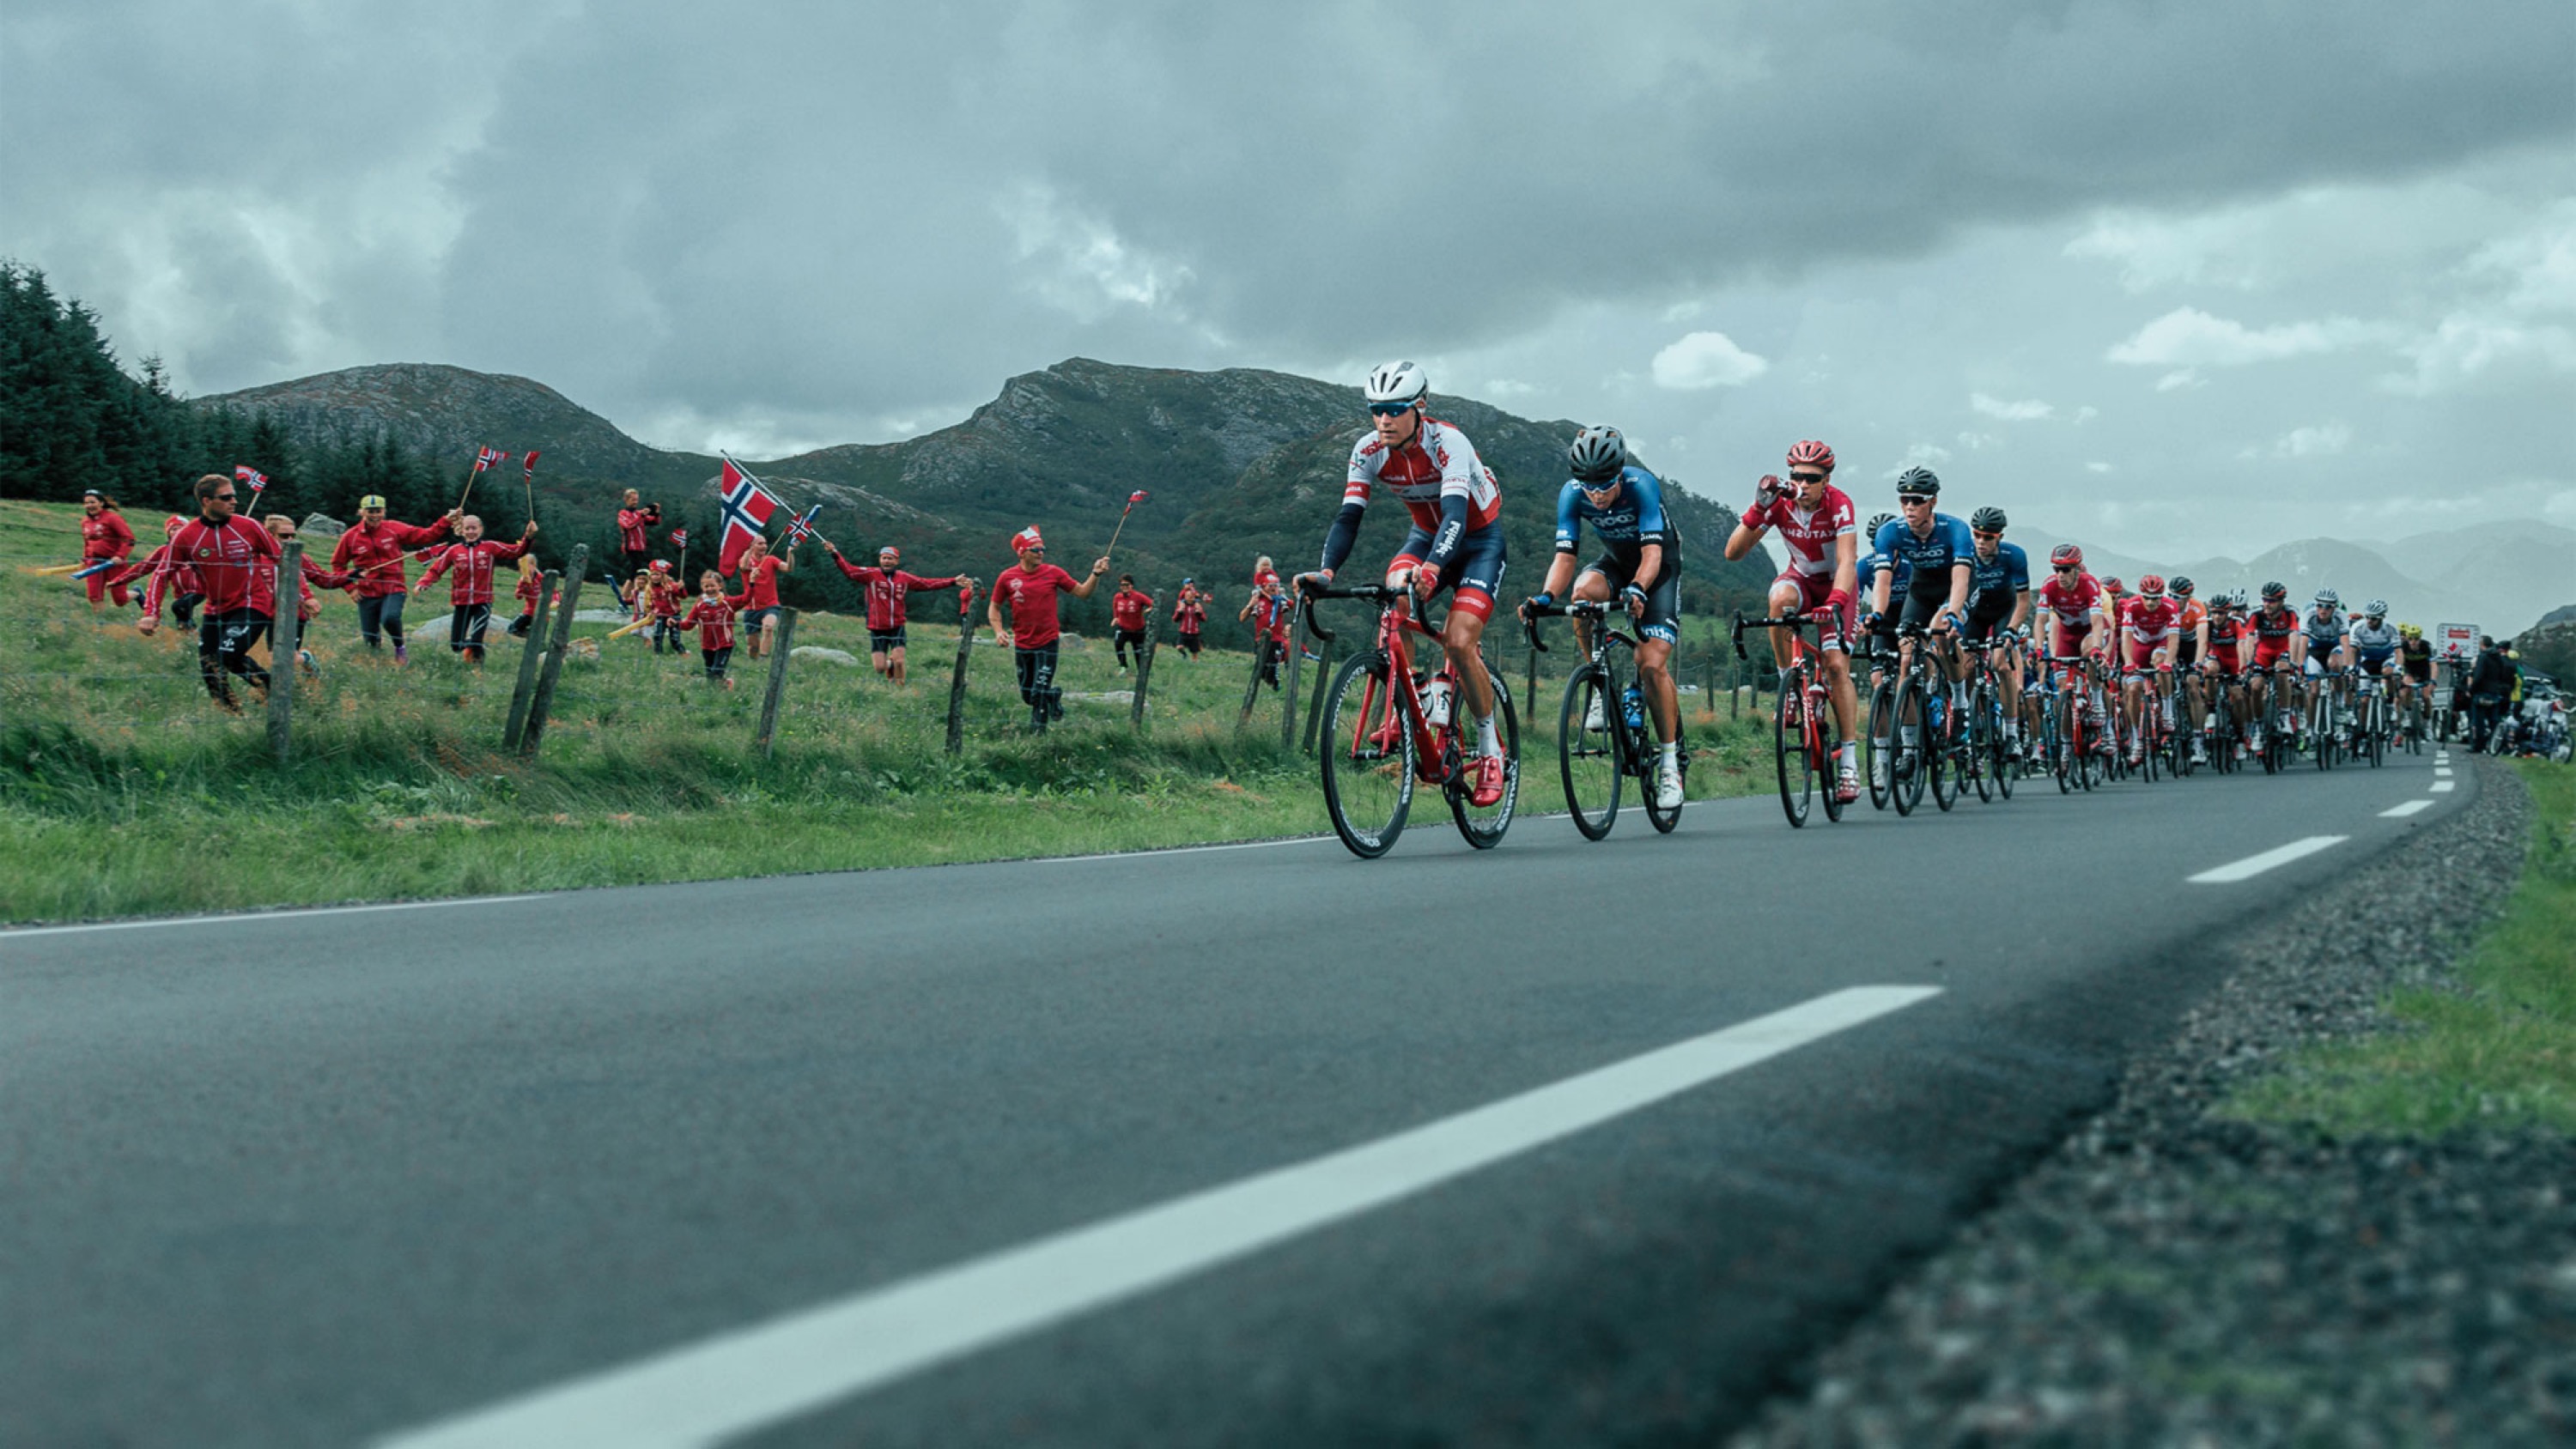 Dramatic racing, stunning scenery, amazing atmosphere - this is Tour of Norway